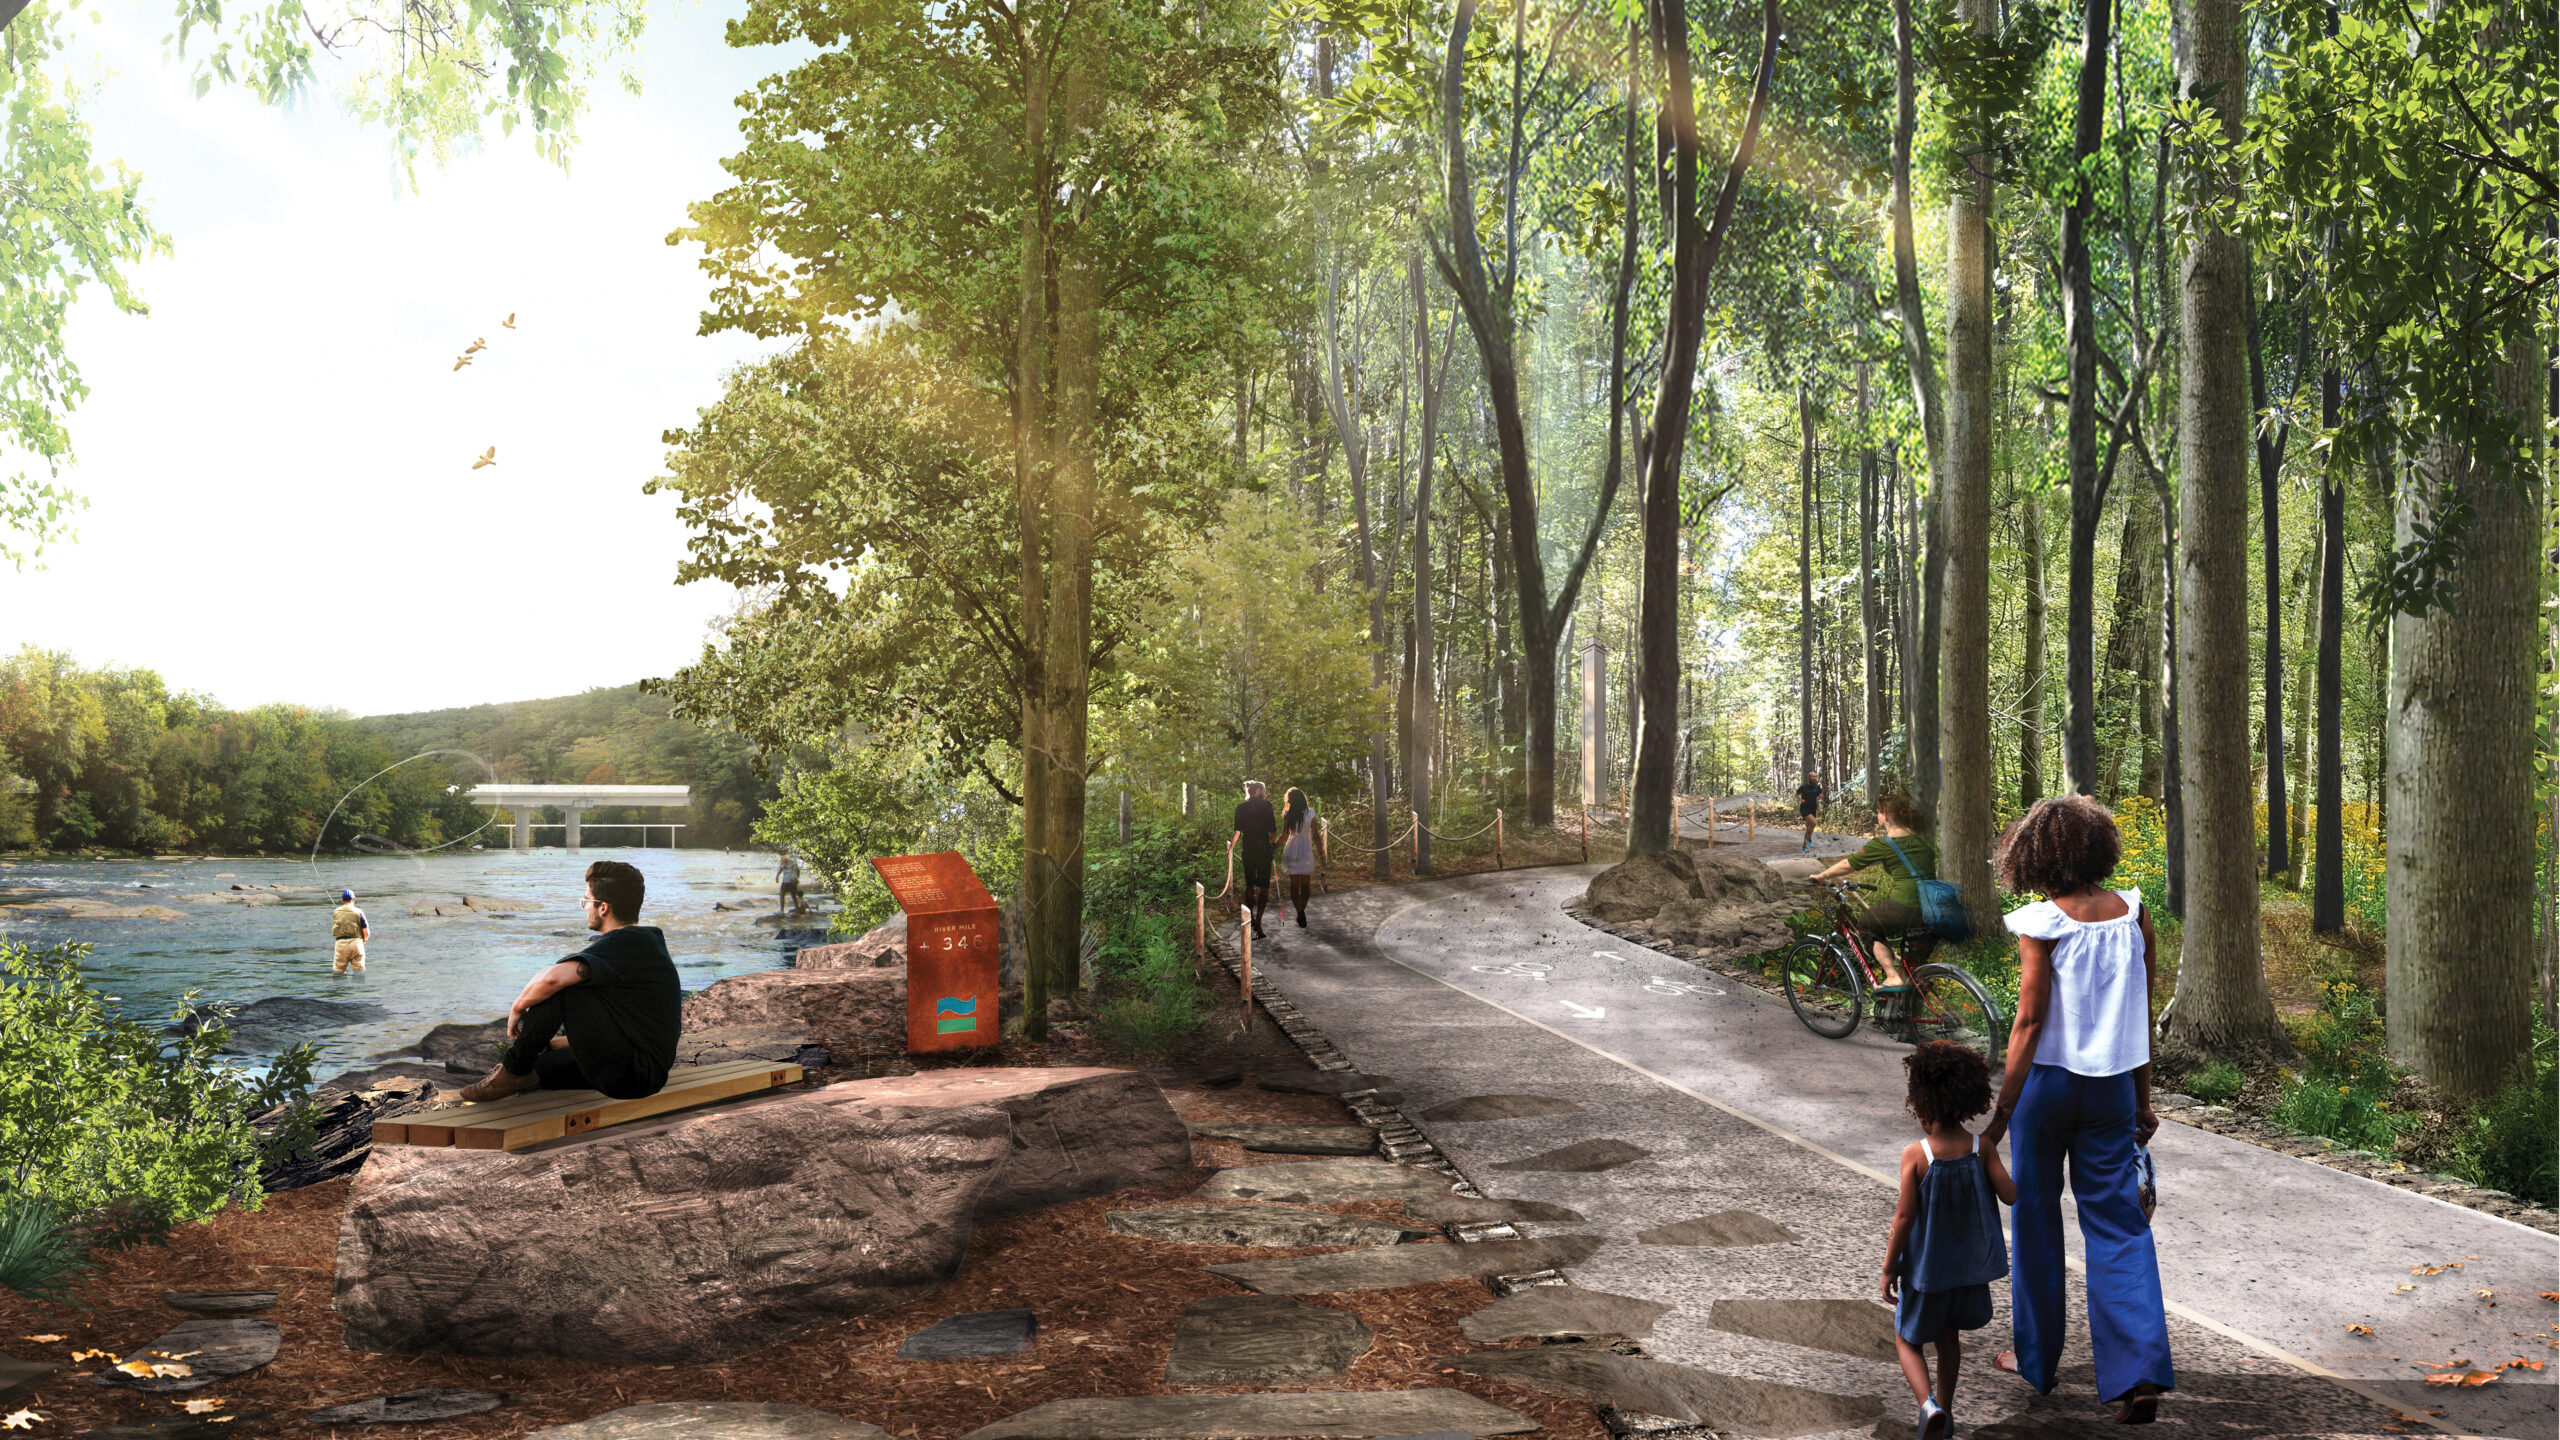 An artist's rendering of a bike path in the woods.